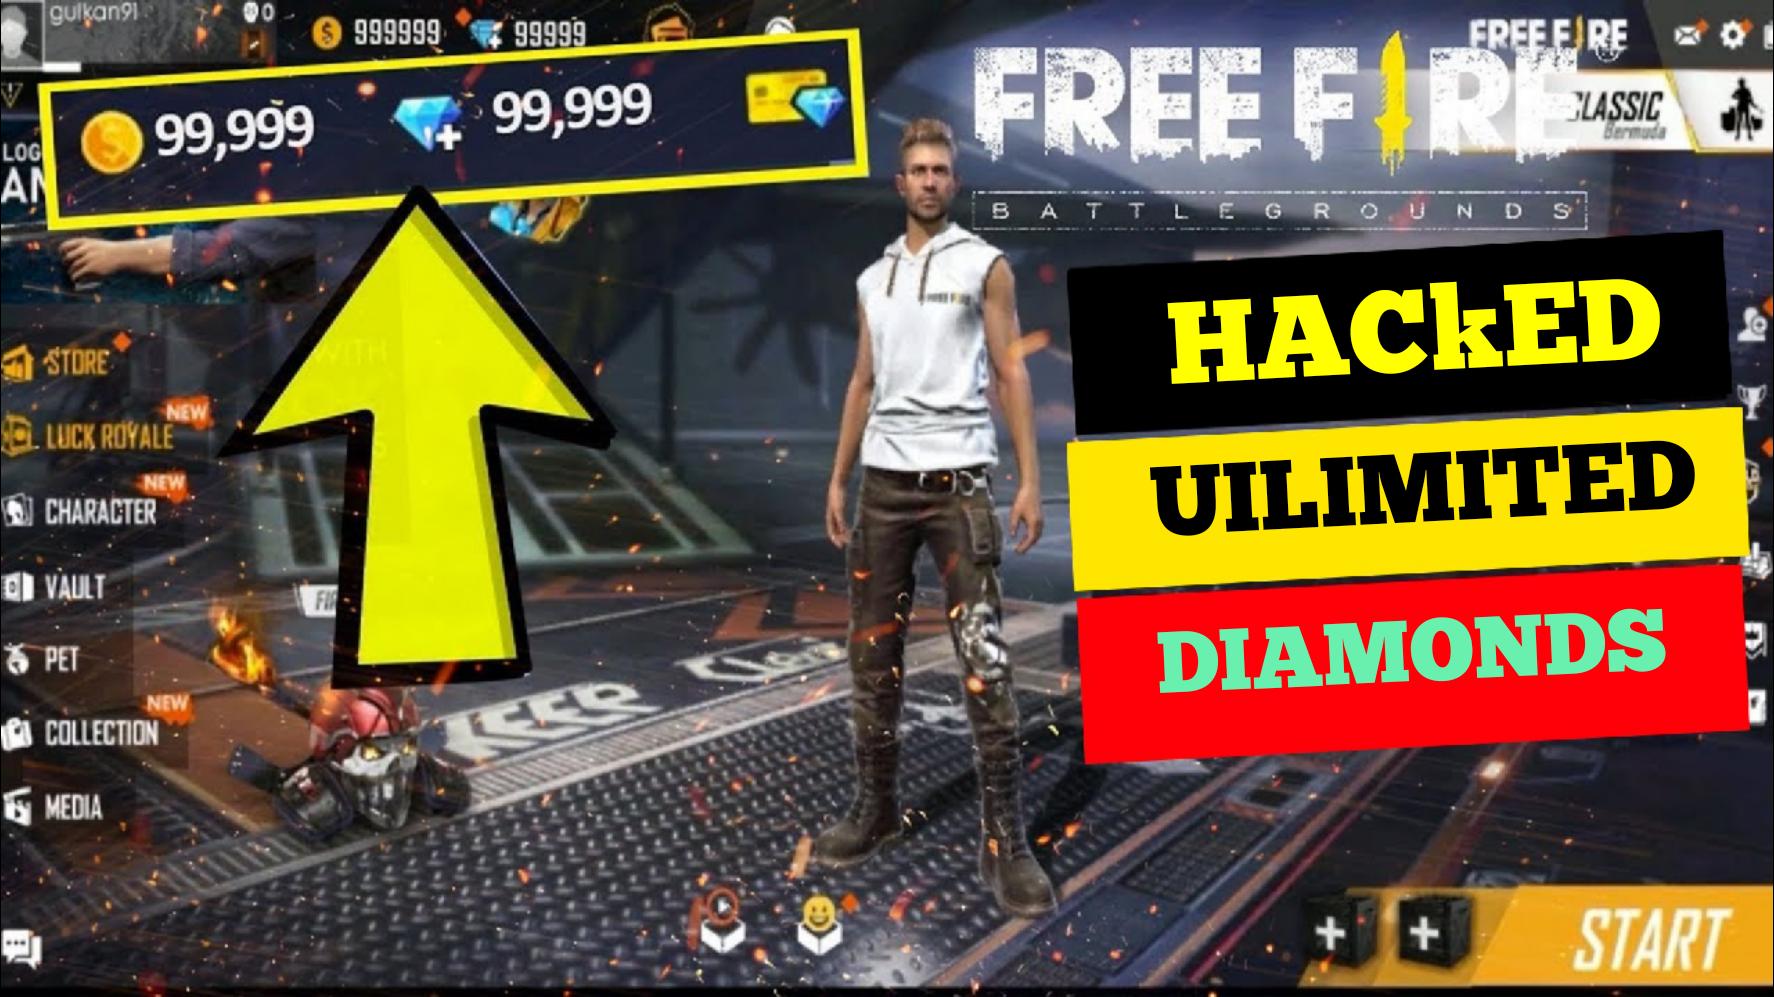 How To Hack Free Fire Diamonds 99999 App 2020 Download